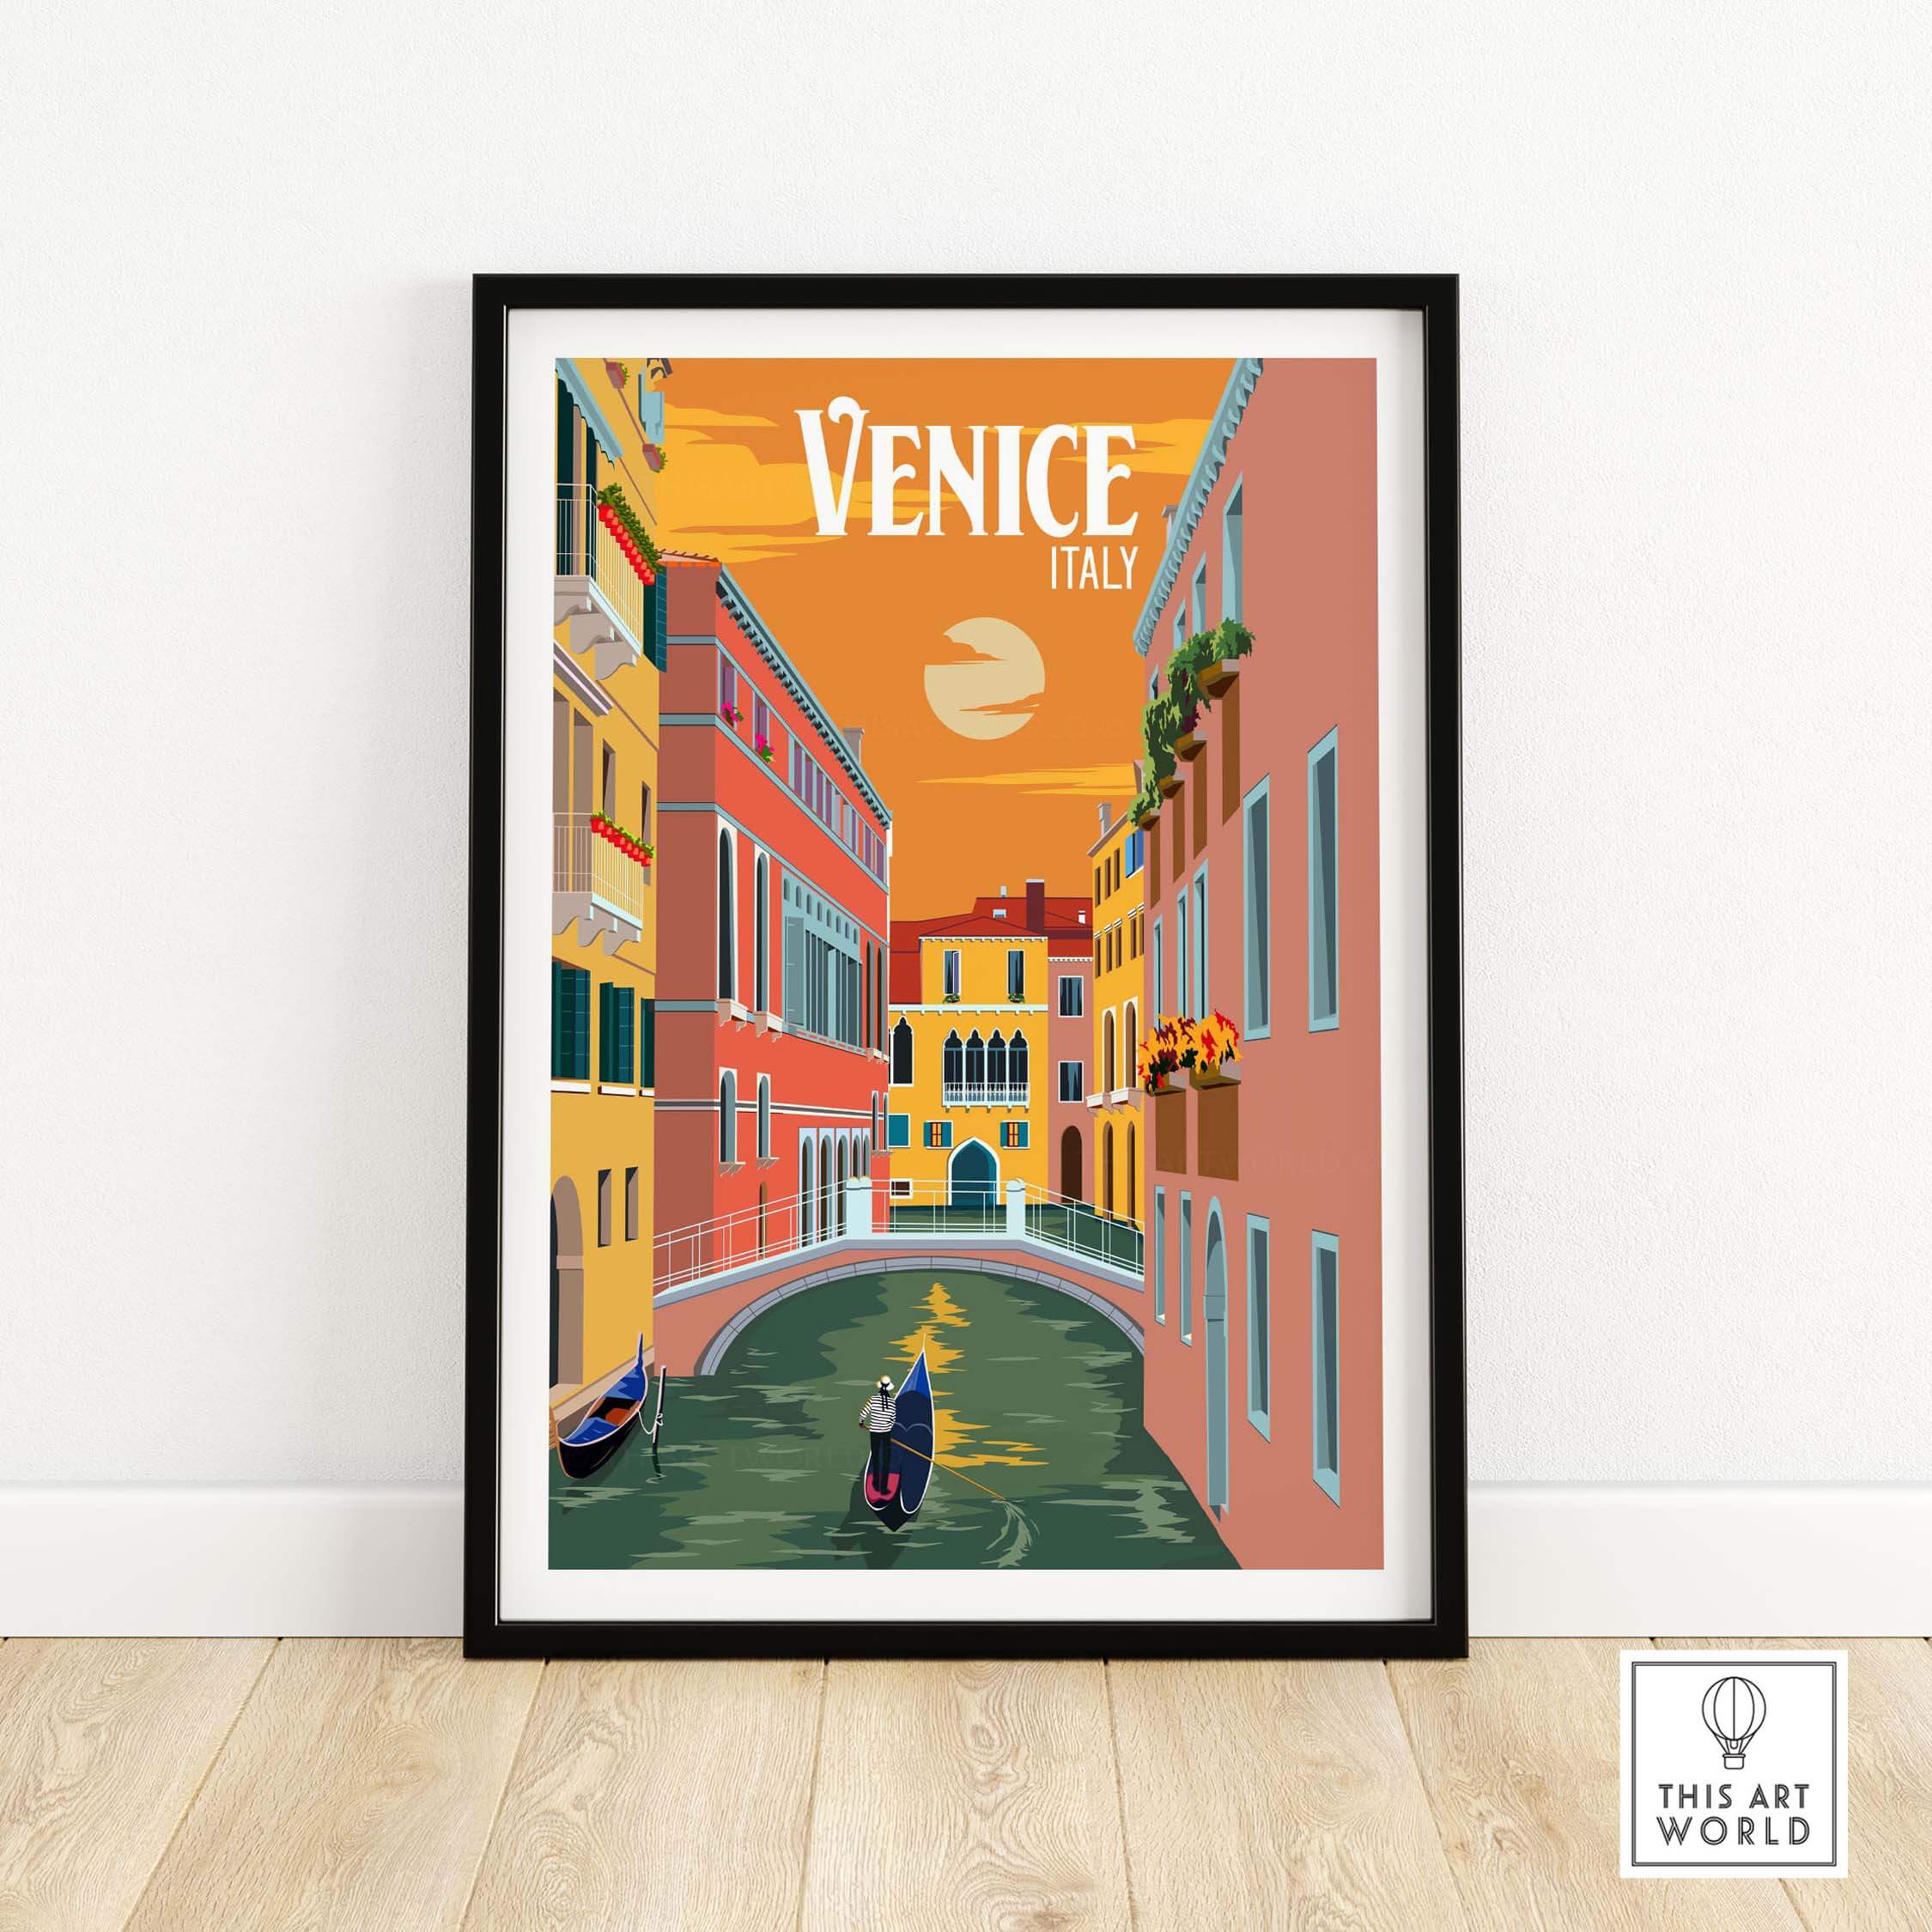 Europe Travel Posters  Iconic Destinations Art